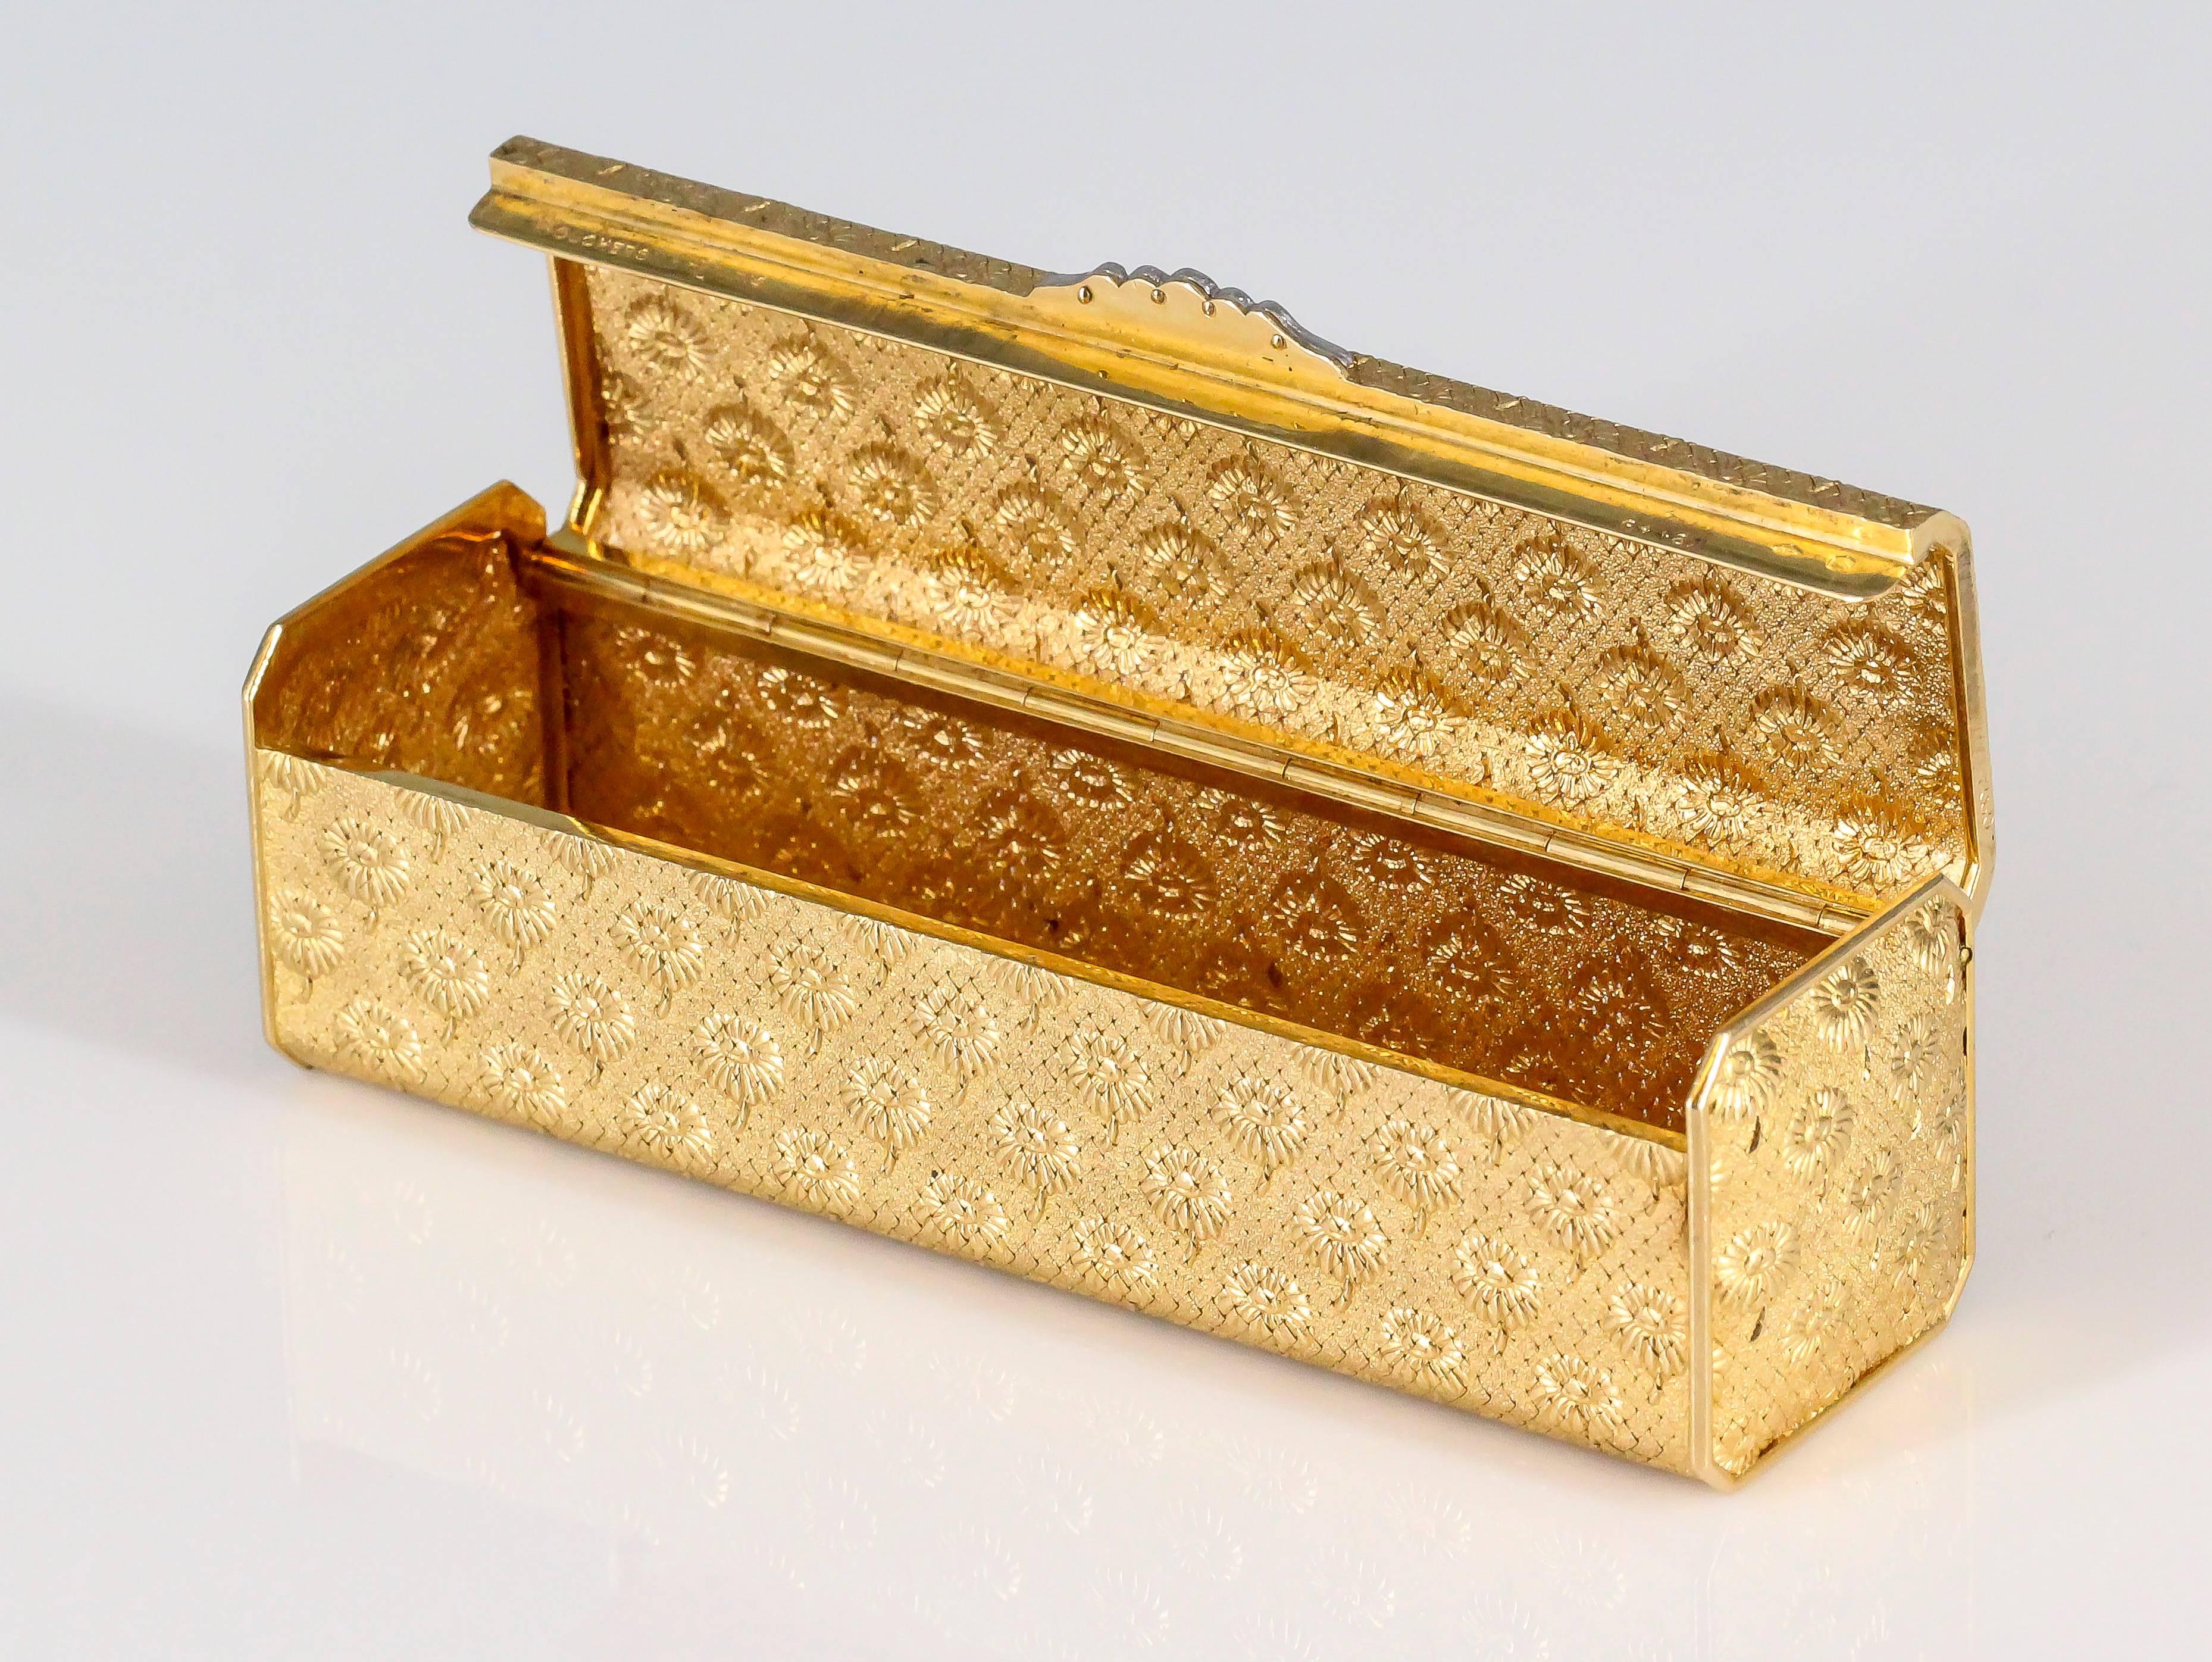 Elegant 18K yellow gold box from the "Marguerite" collection by Boucheron, circa 1960s.  The box can be used for pills or as a lipstick case, among other uses. It features a repeating flower motif resembling marguerite daisies throughout